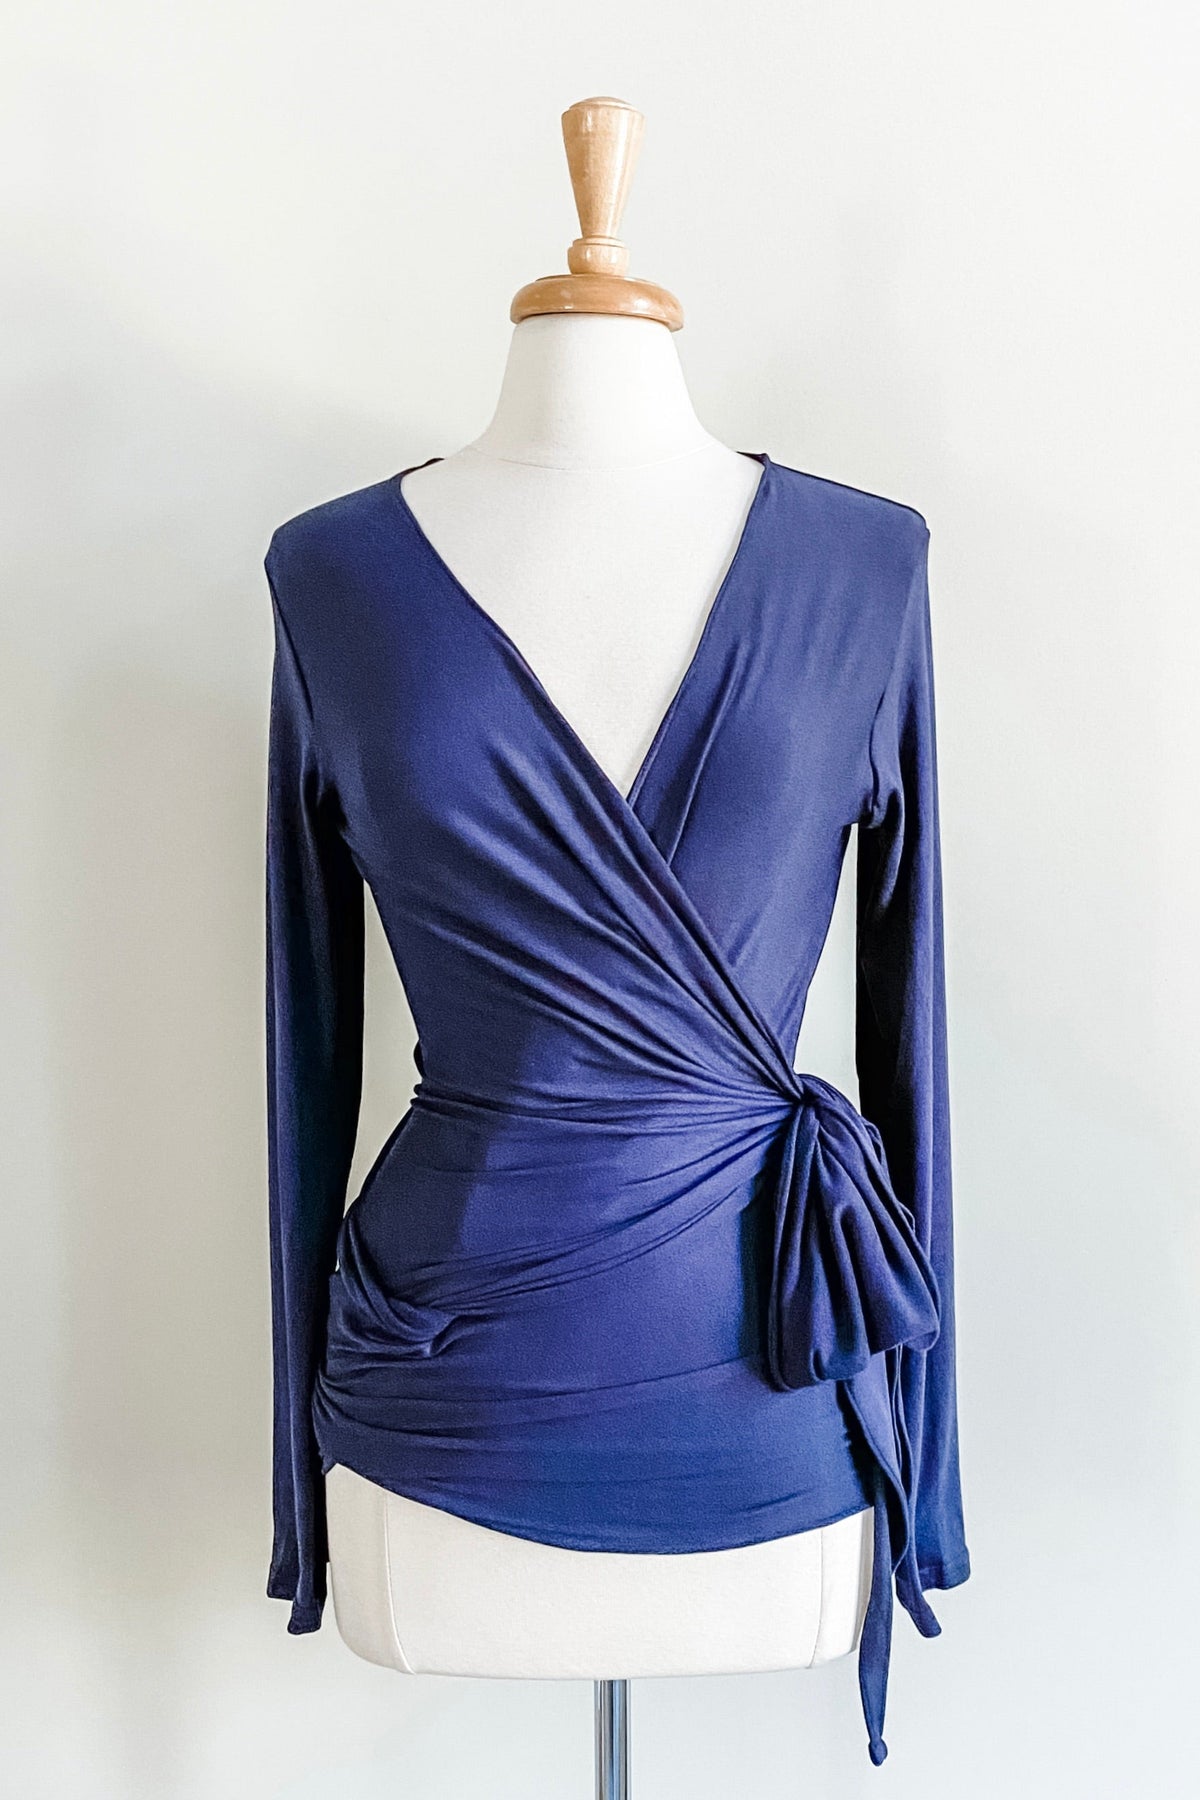 Diane Kroe Wrap Top (Navy Blue) - The Classic Capsule Collection